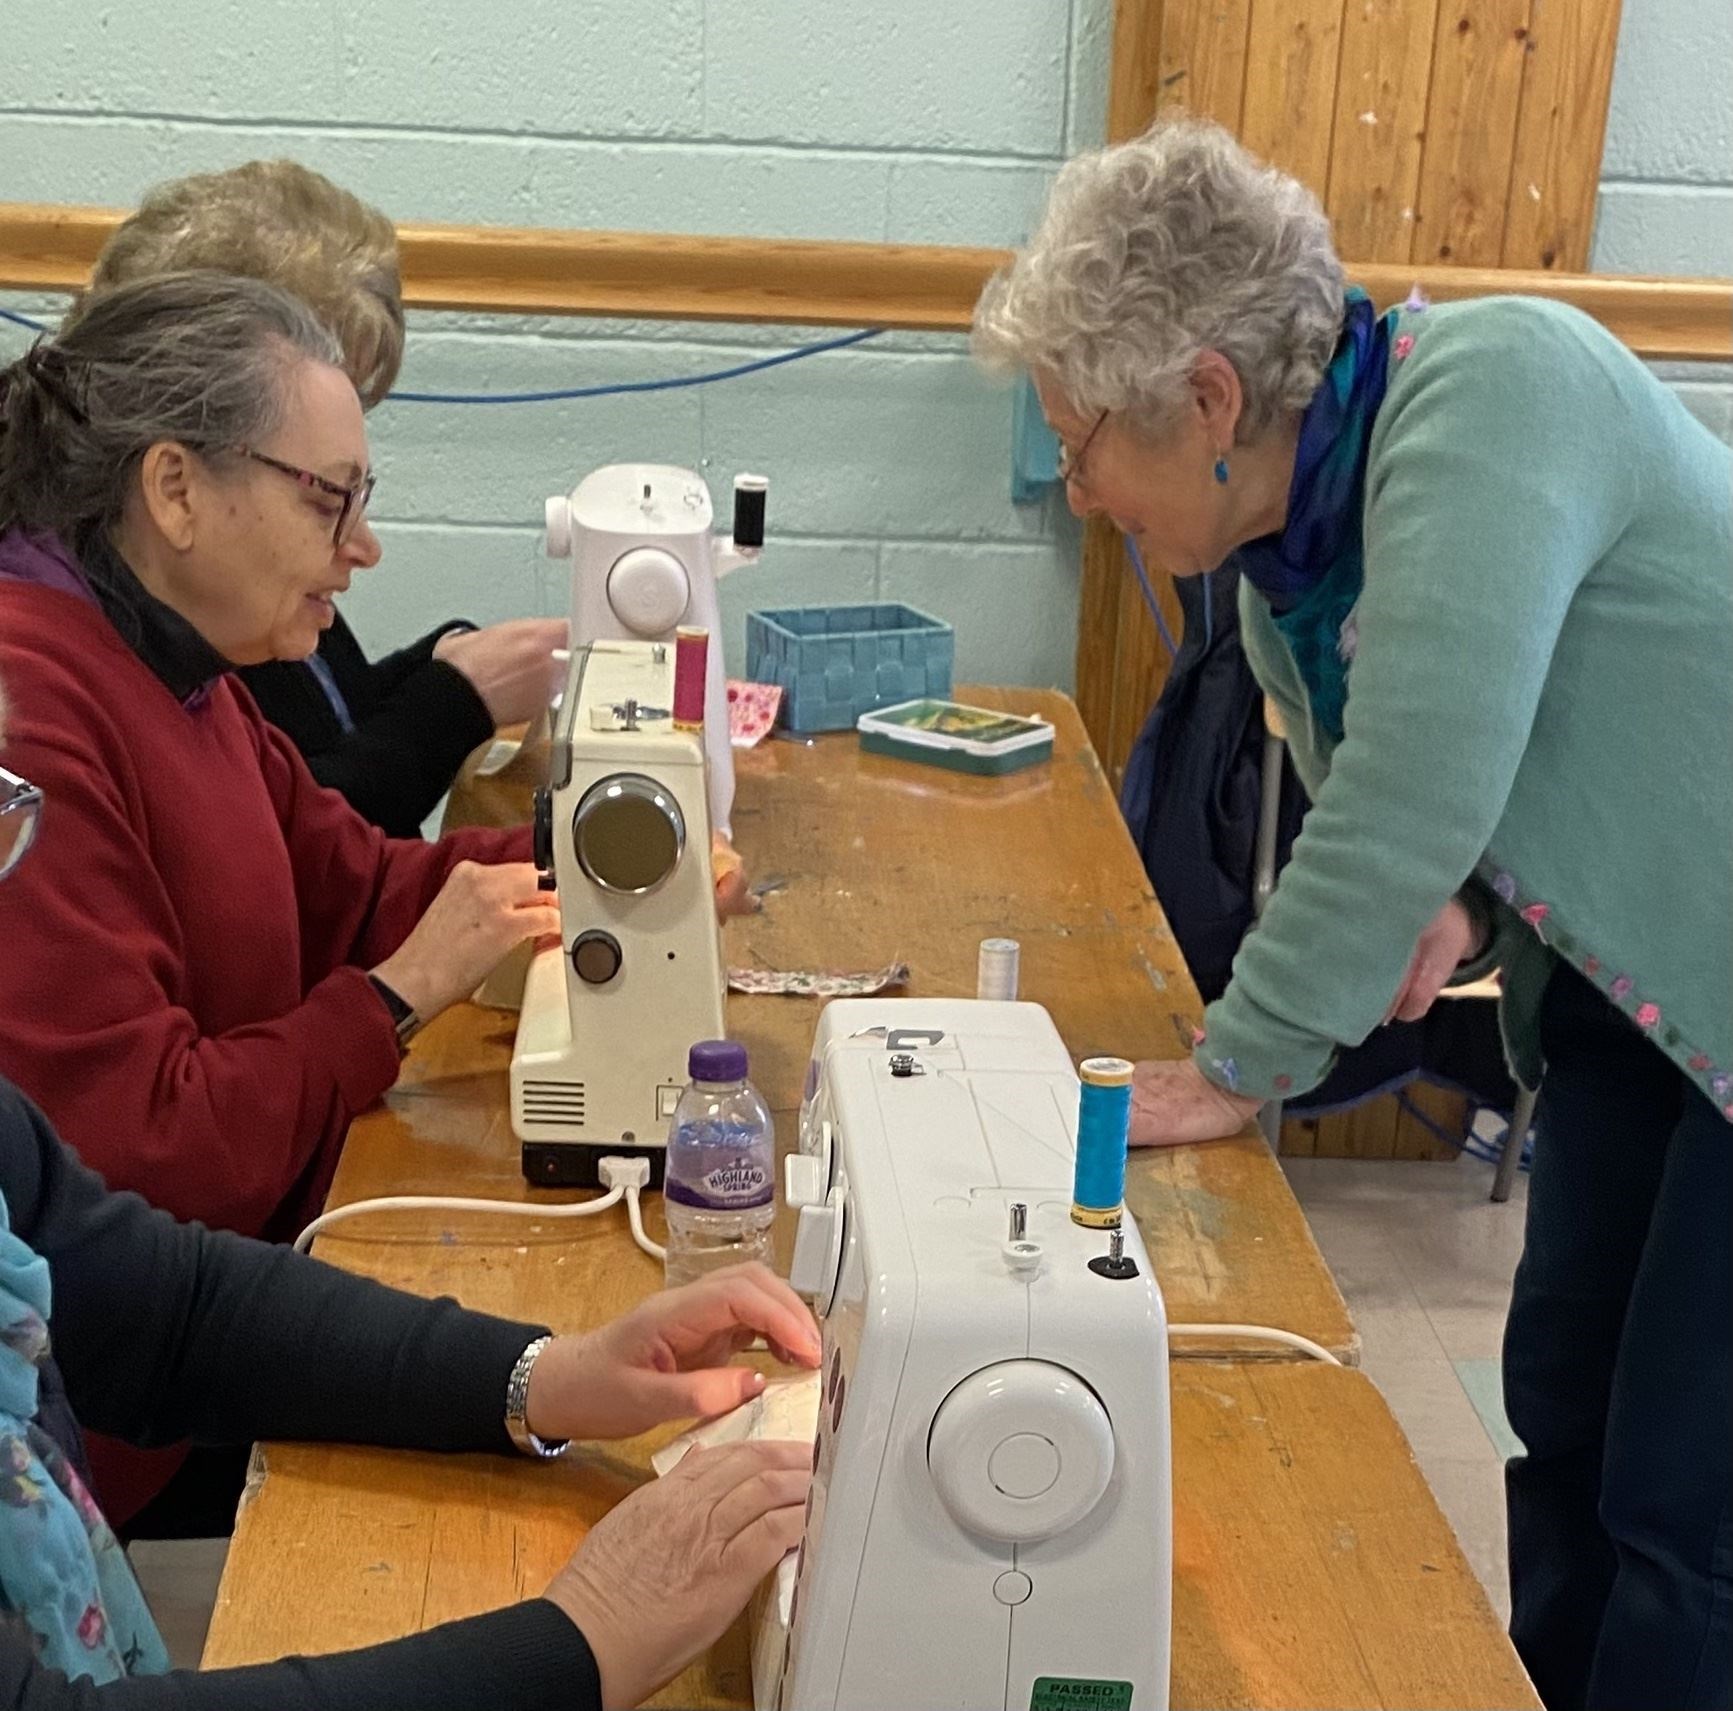 Creativity in Care sewing session with Chris Lea and Cath Gillies.